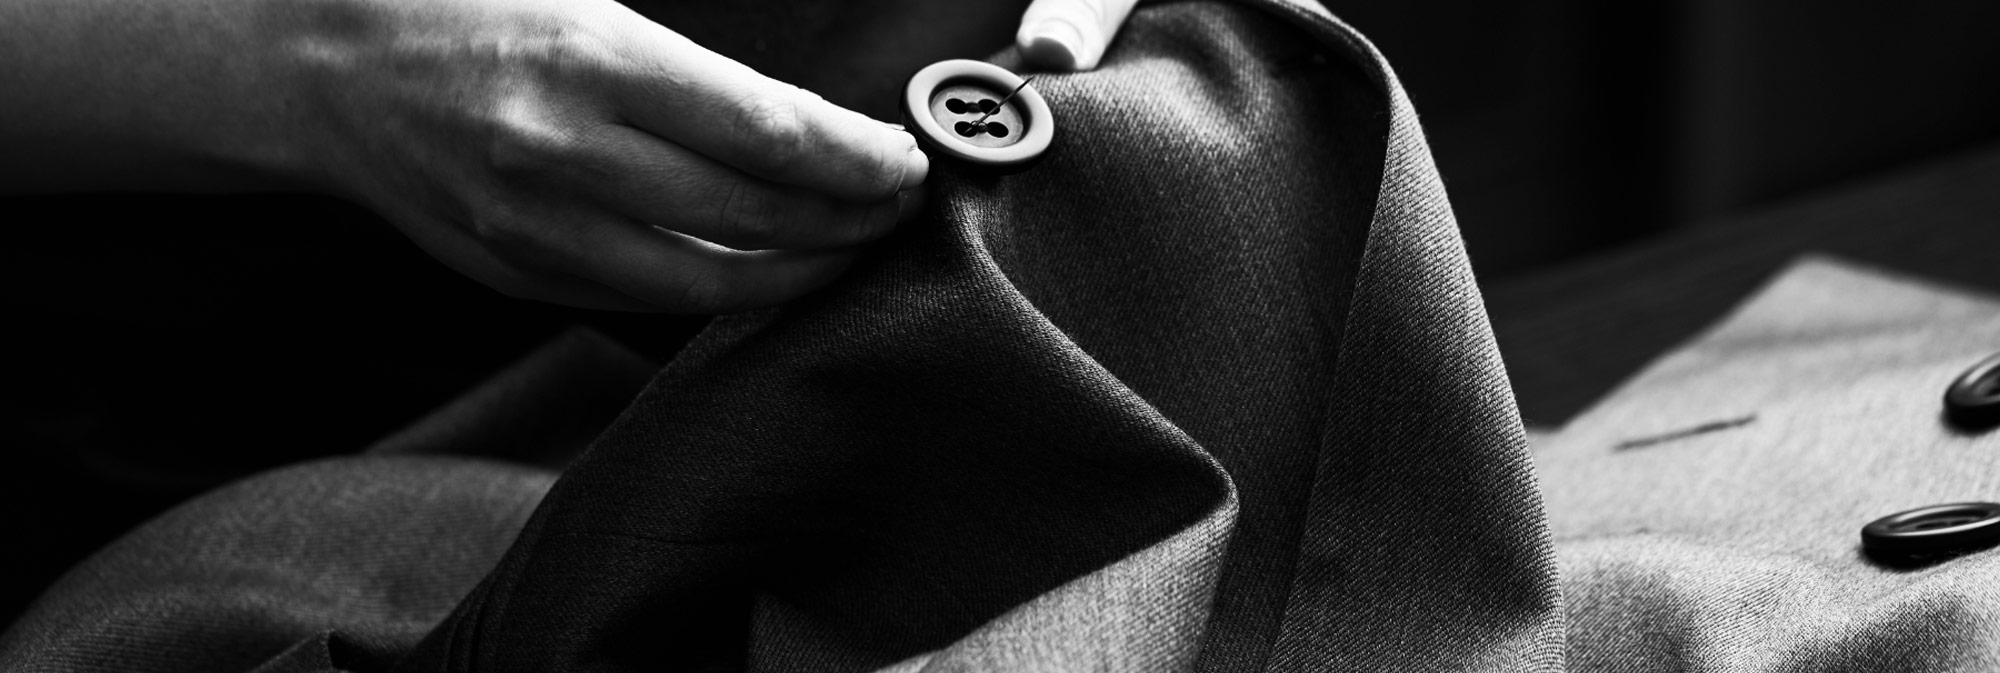 Close-up of hand carefully sowing a button on to a jacket